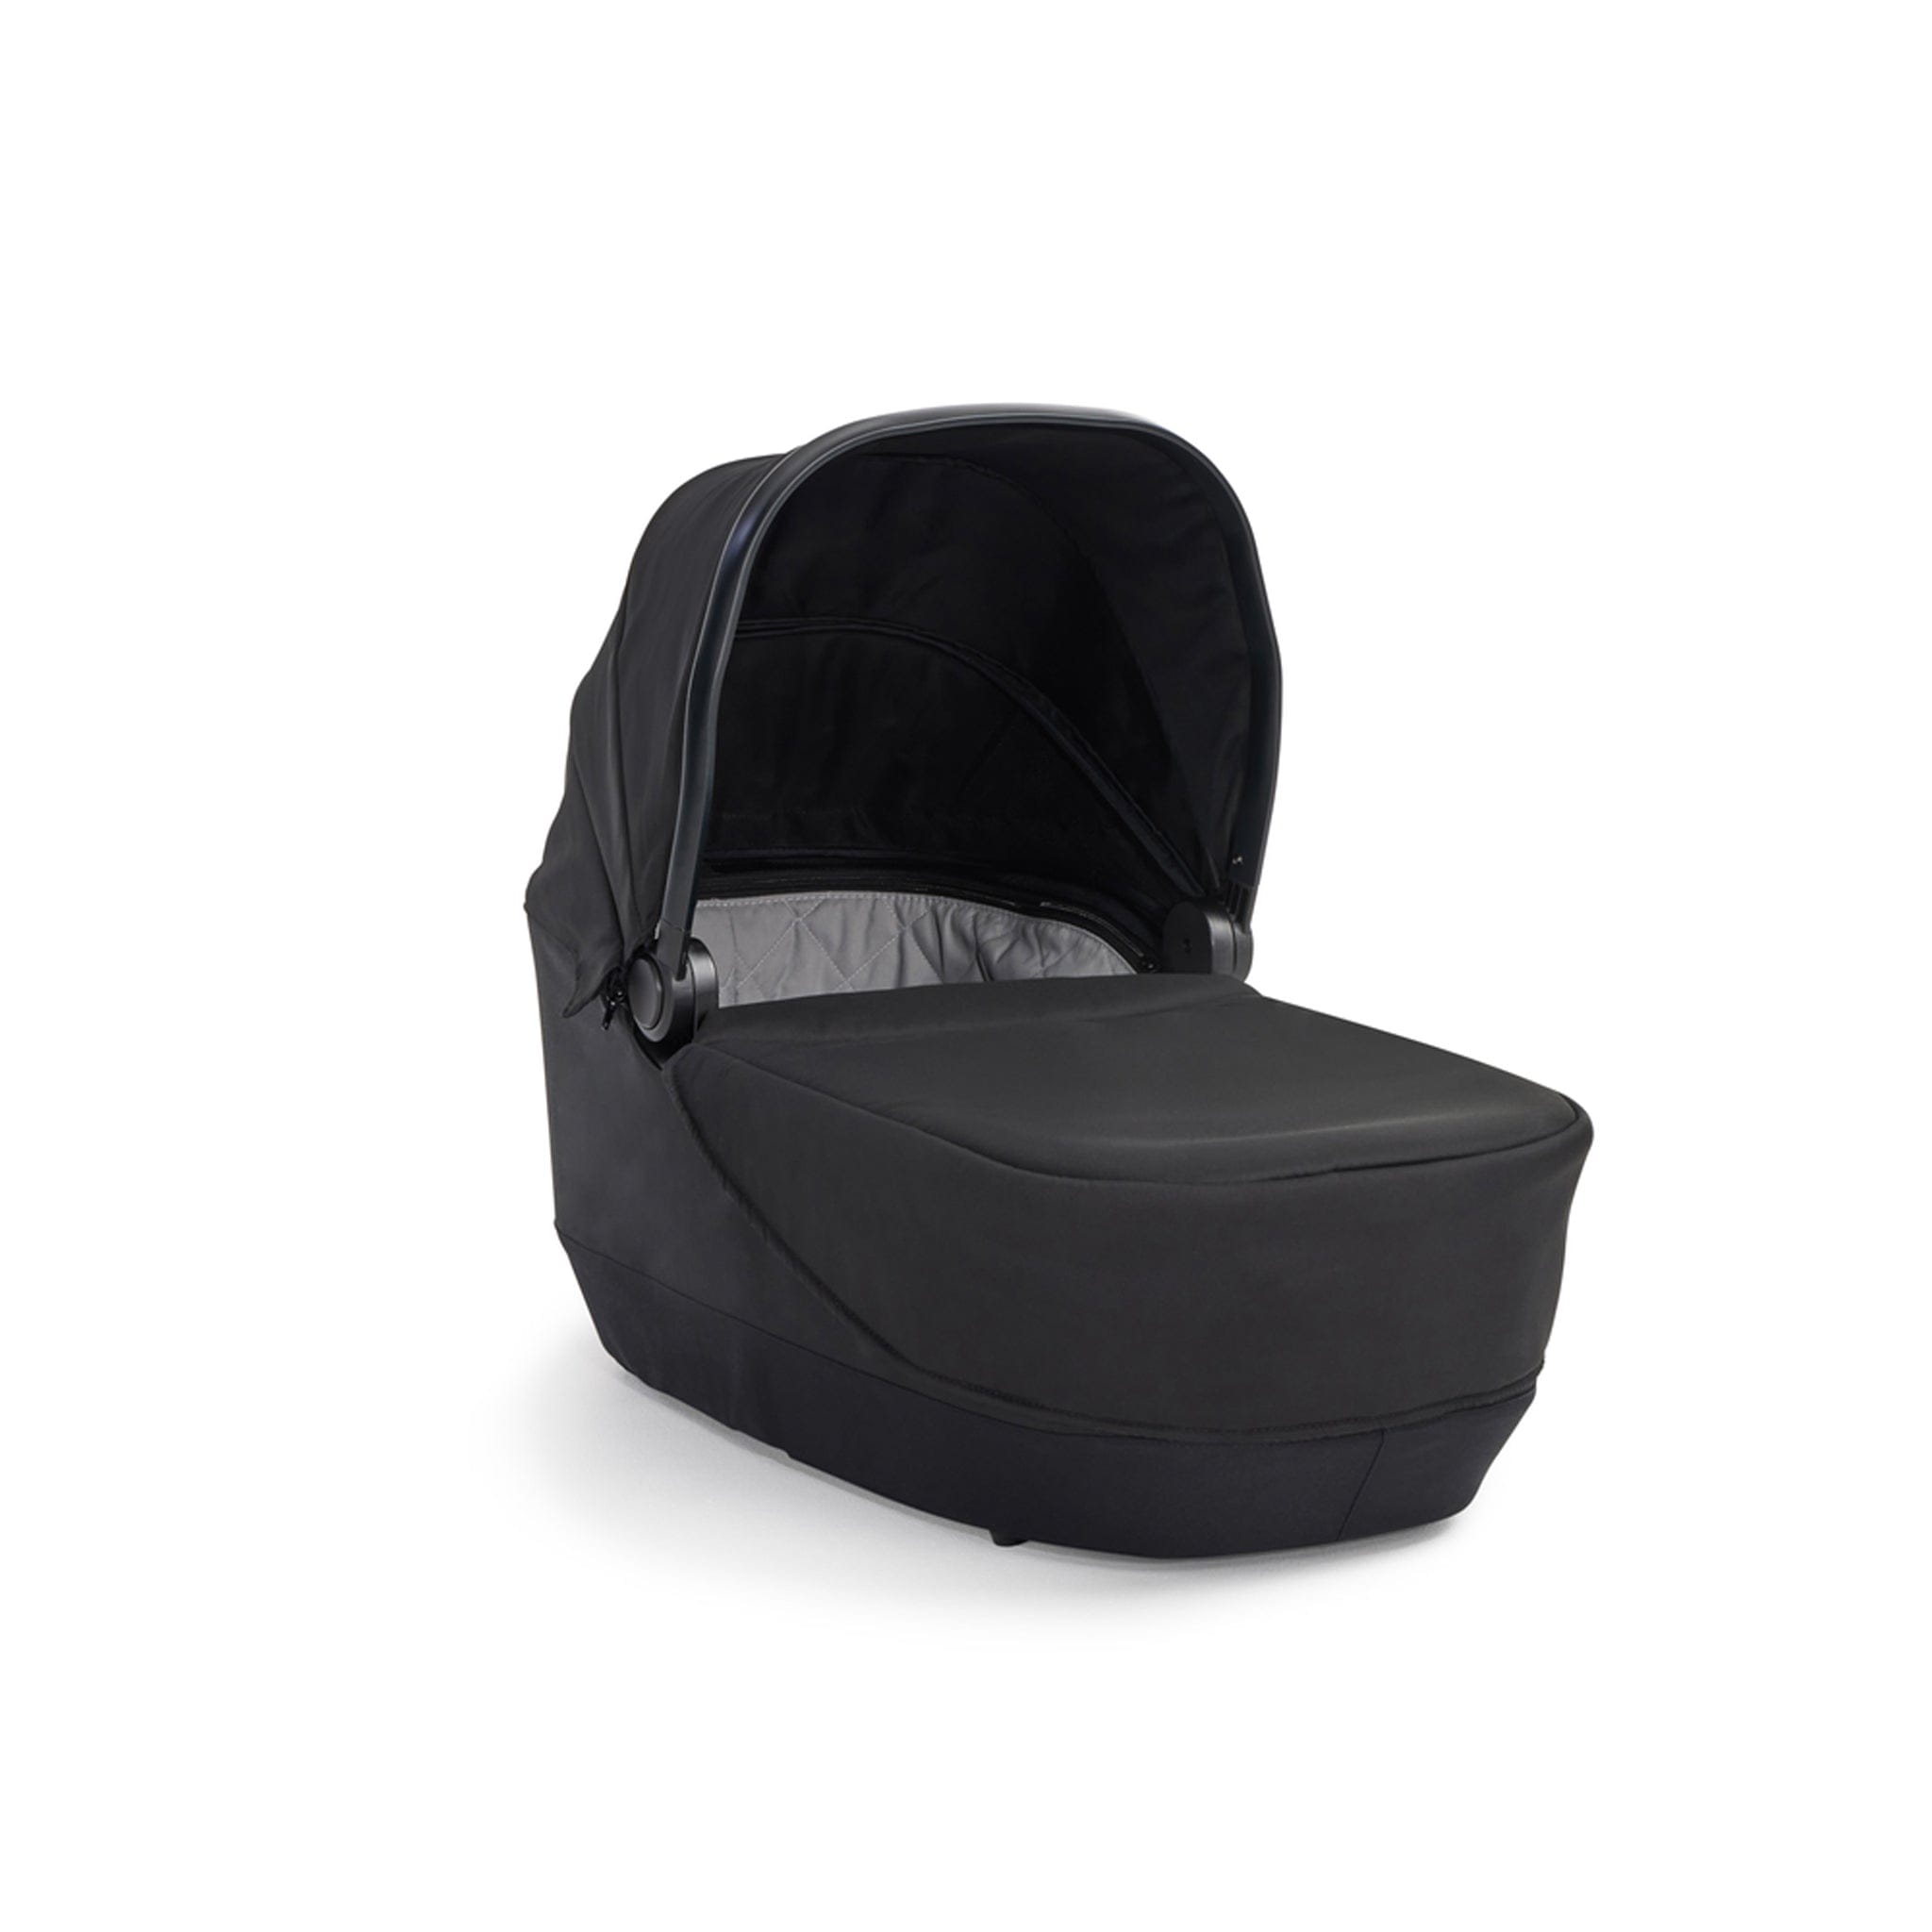 Baby Jogger City Sights Bundle in Rich Black Pushchairs & Buggies 2171443 0047406183685